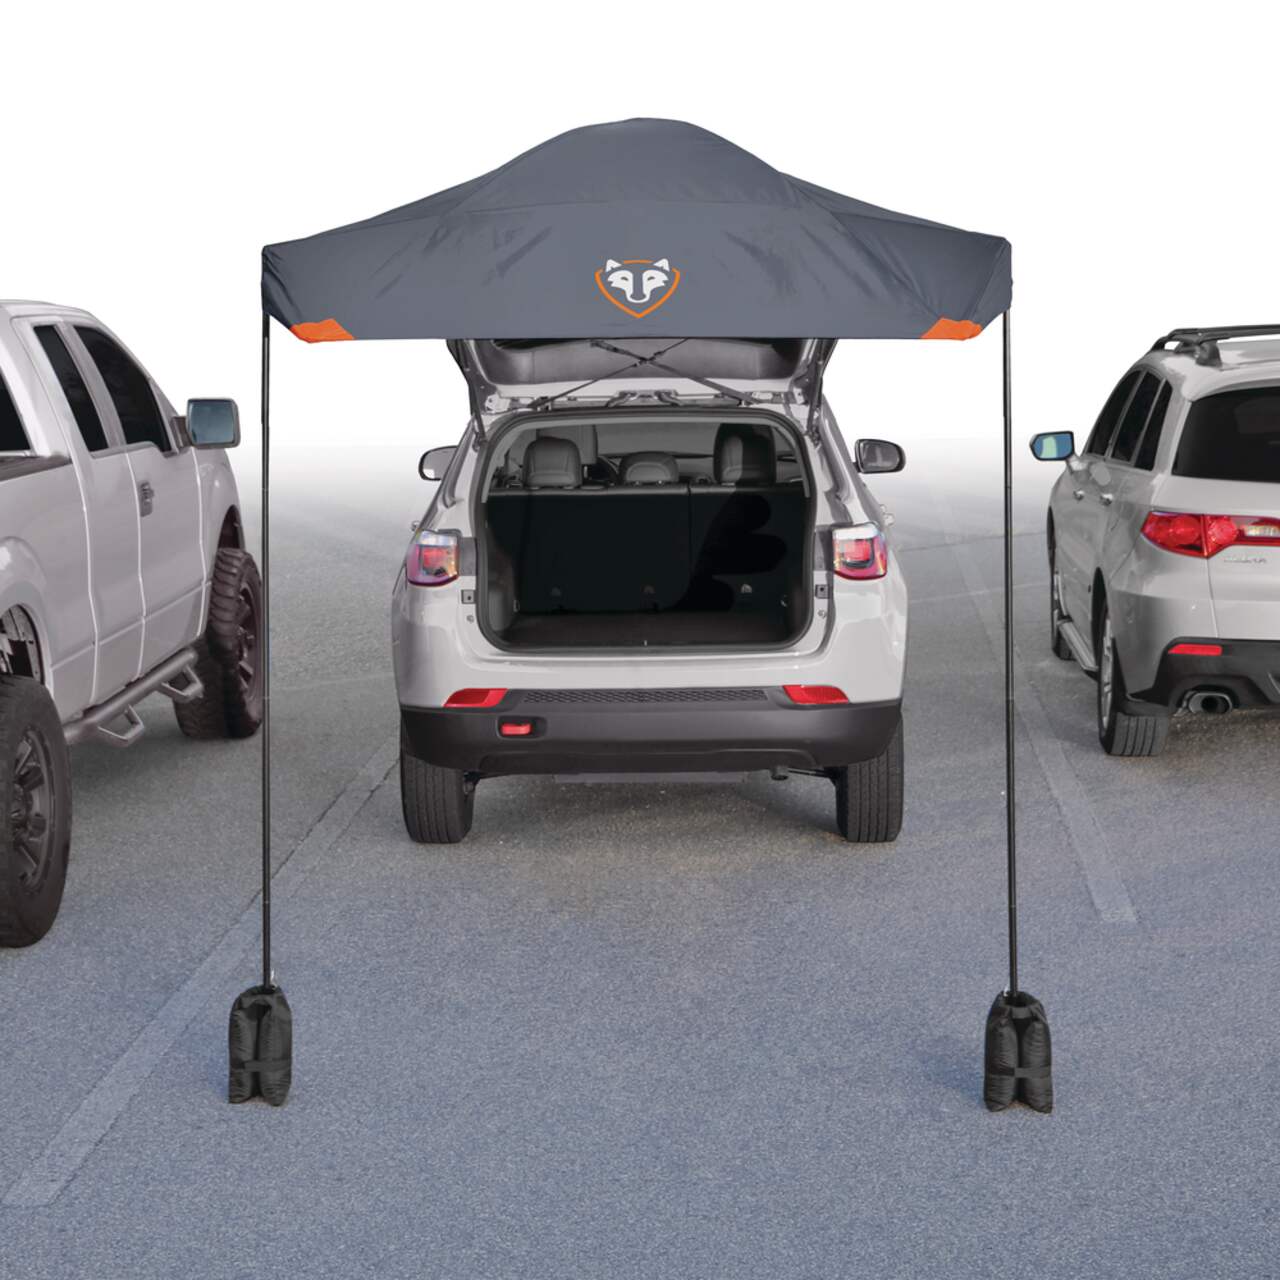 https://media-www.canadiantire.ca/product/automotive/automotive-outdoor-adventure/auto-travel-storage/0401583/rightline-suv-canopy-1092e11e-e512-450c-b82b-eeaeee23d431.png?imdensity=1&imwidth=1244&impolicy=mZoom